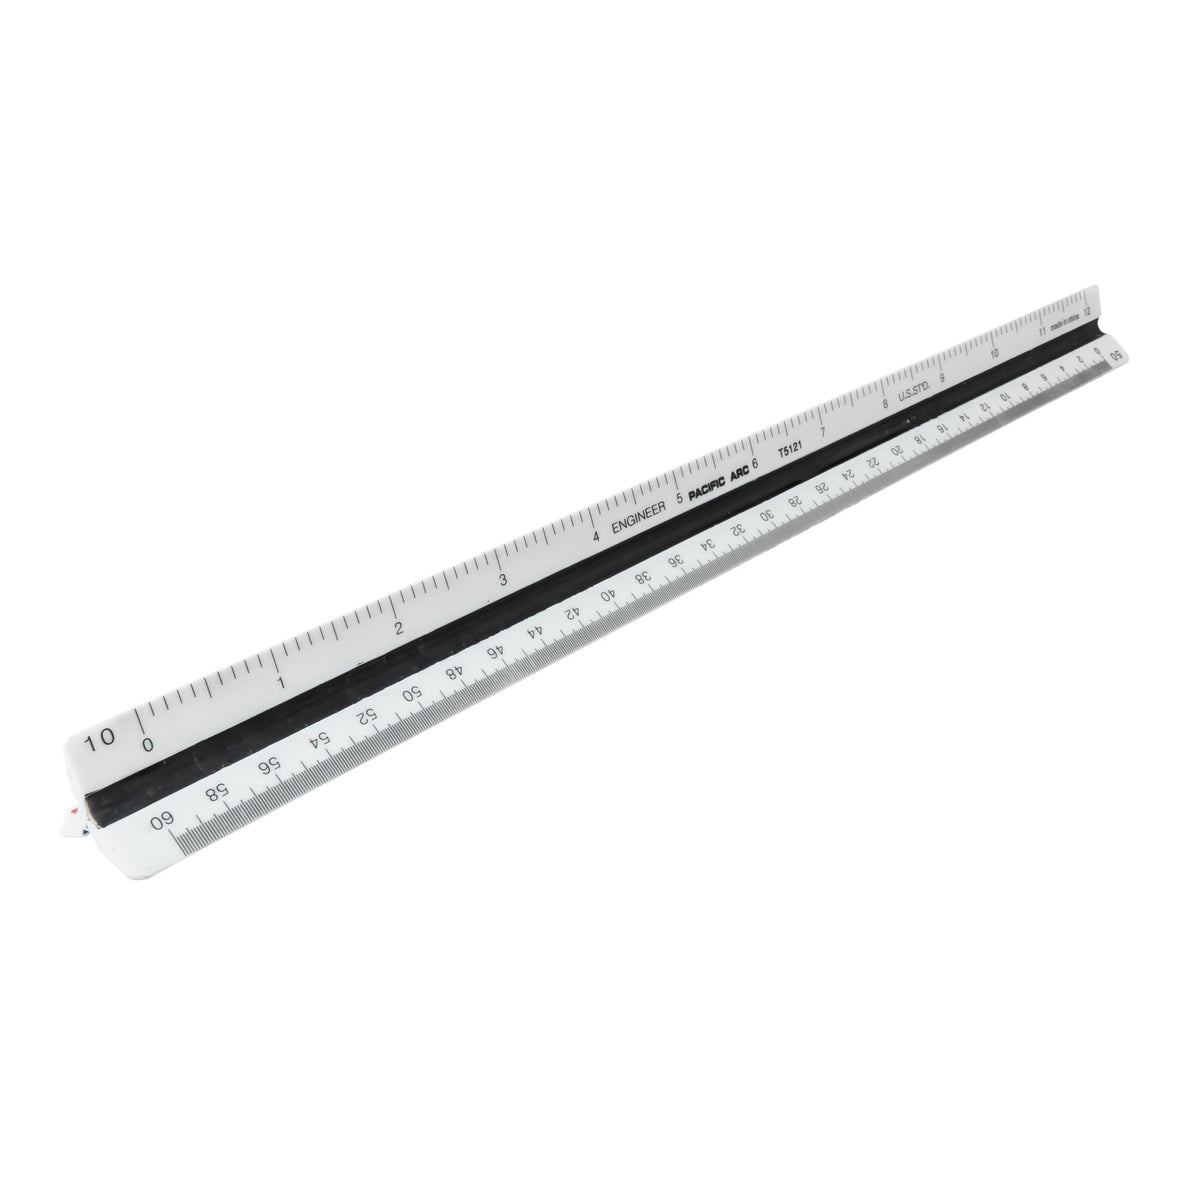  Pacific Arc Stainless Steel 24 Inch Metal Ruler Non-Slip Cork  Back, with Inch and Metric Graduations : Tools & Home Improvement